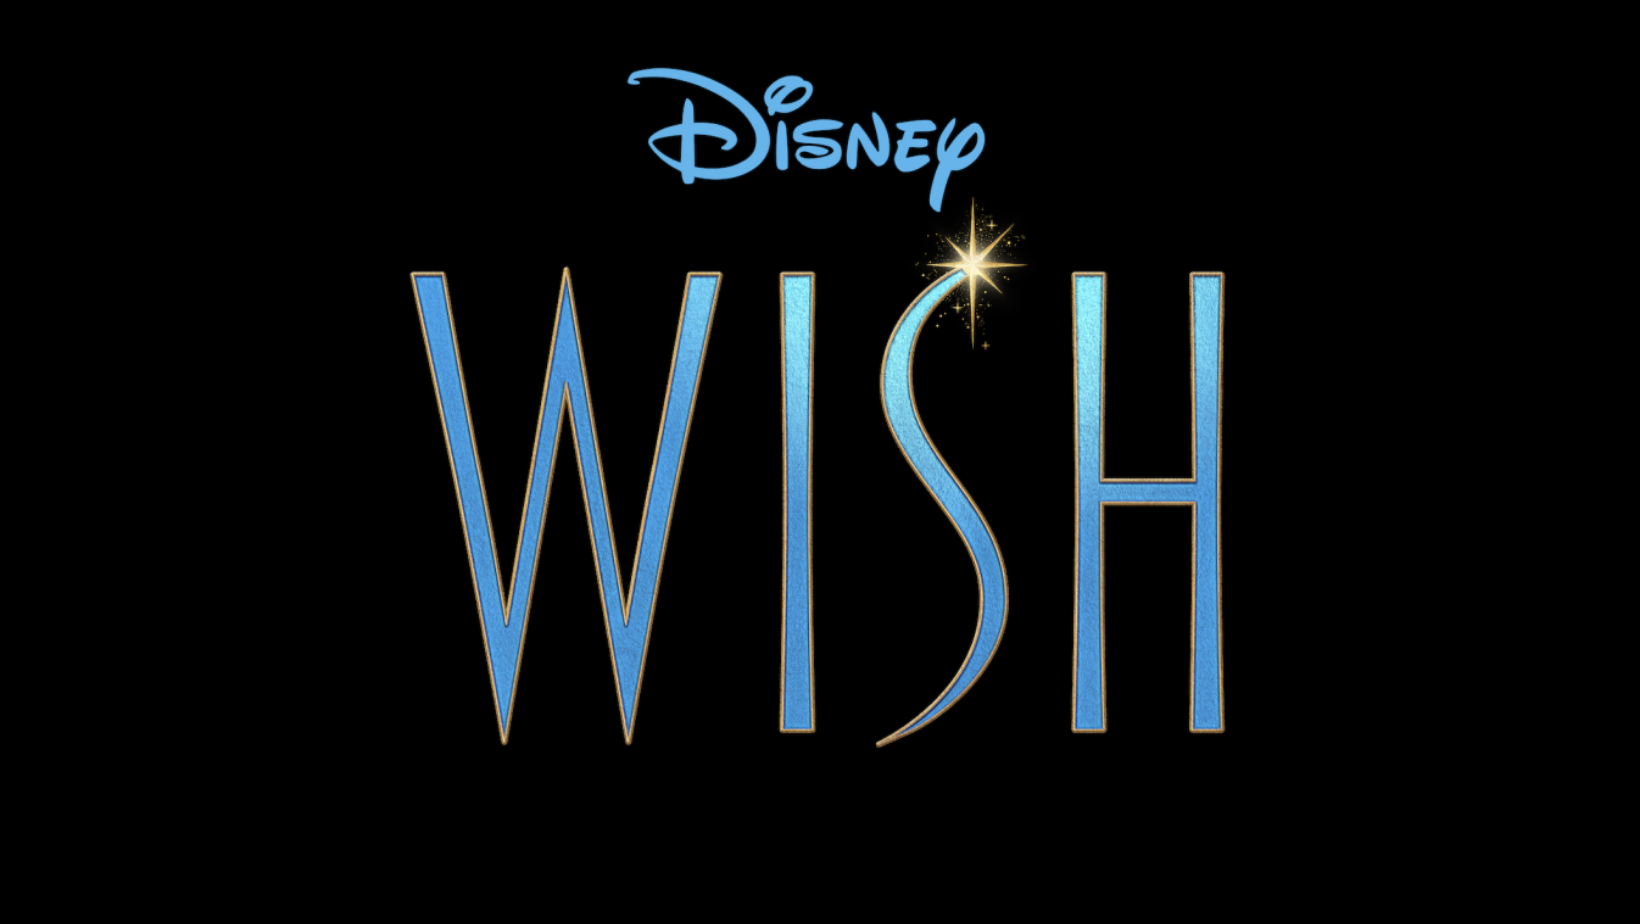 Disney Wish poster with blue writing